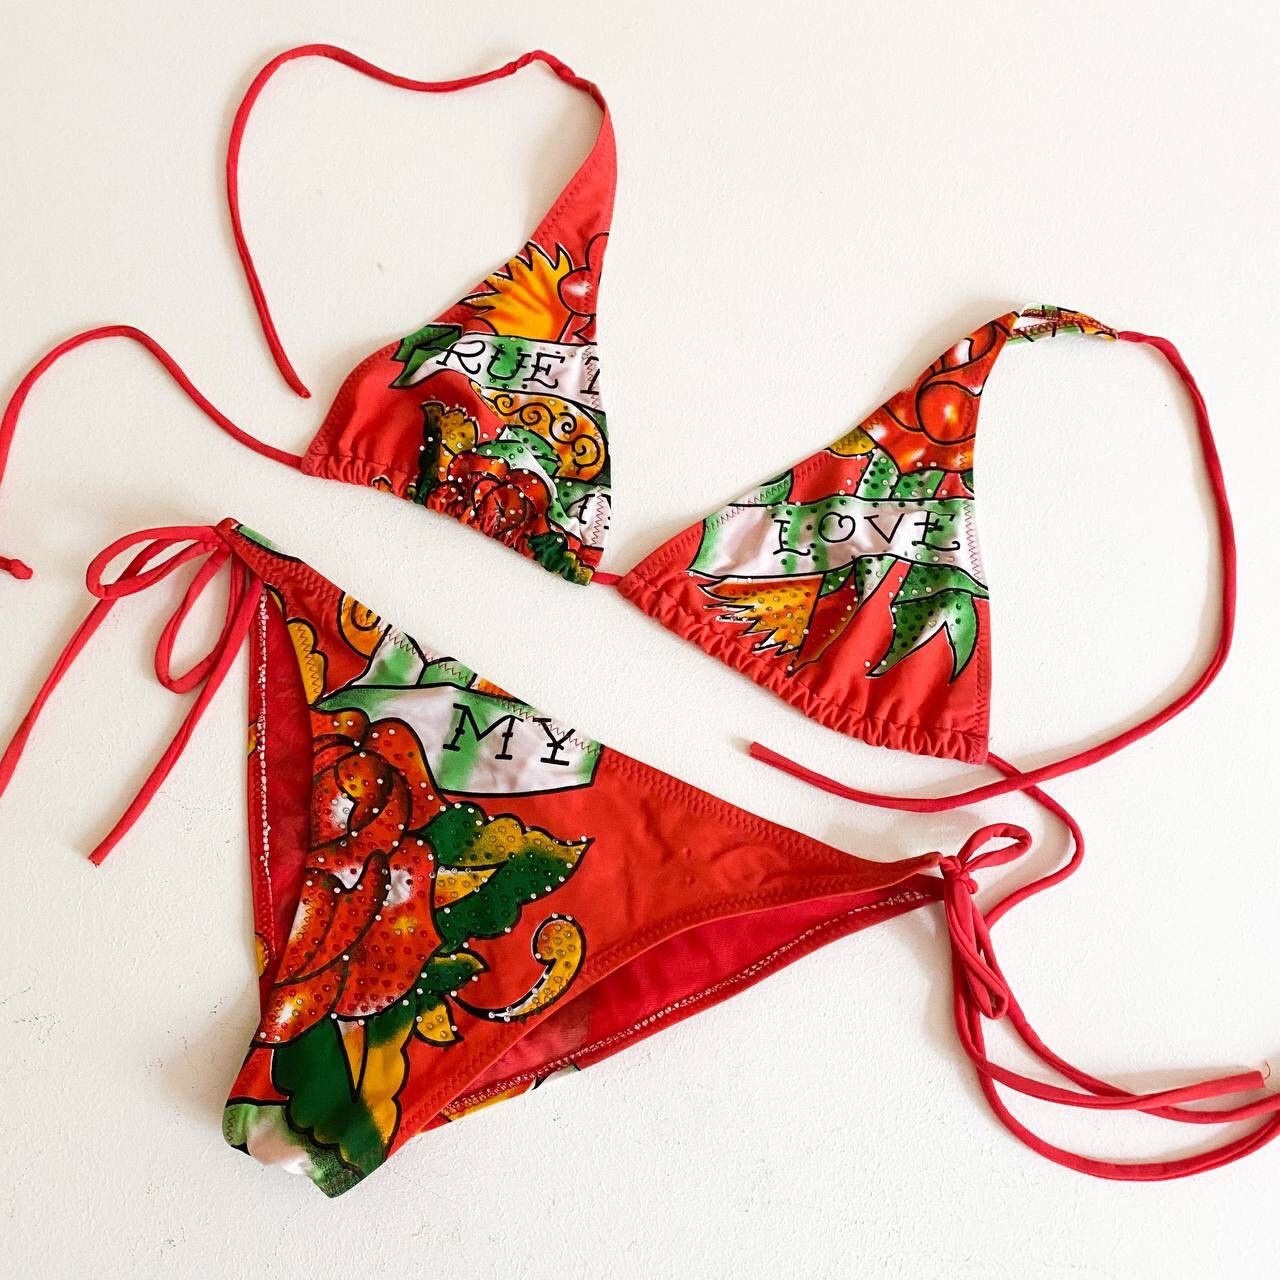 Christian Audigier Y2K Ed Hardy by Christian Audigier Swimsuit Bathing Suit Size ONE SIZE - 2 Preview